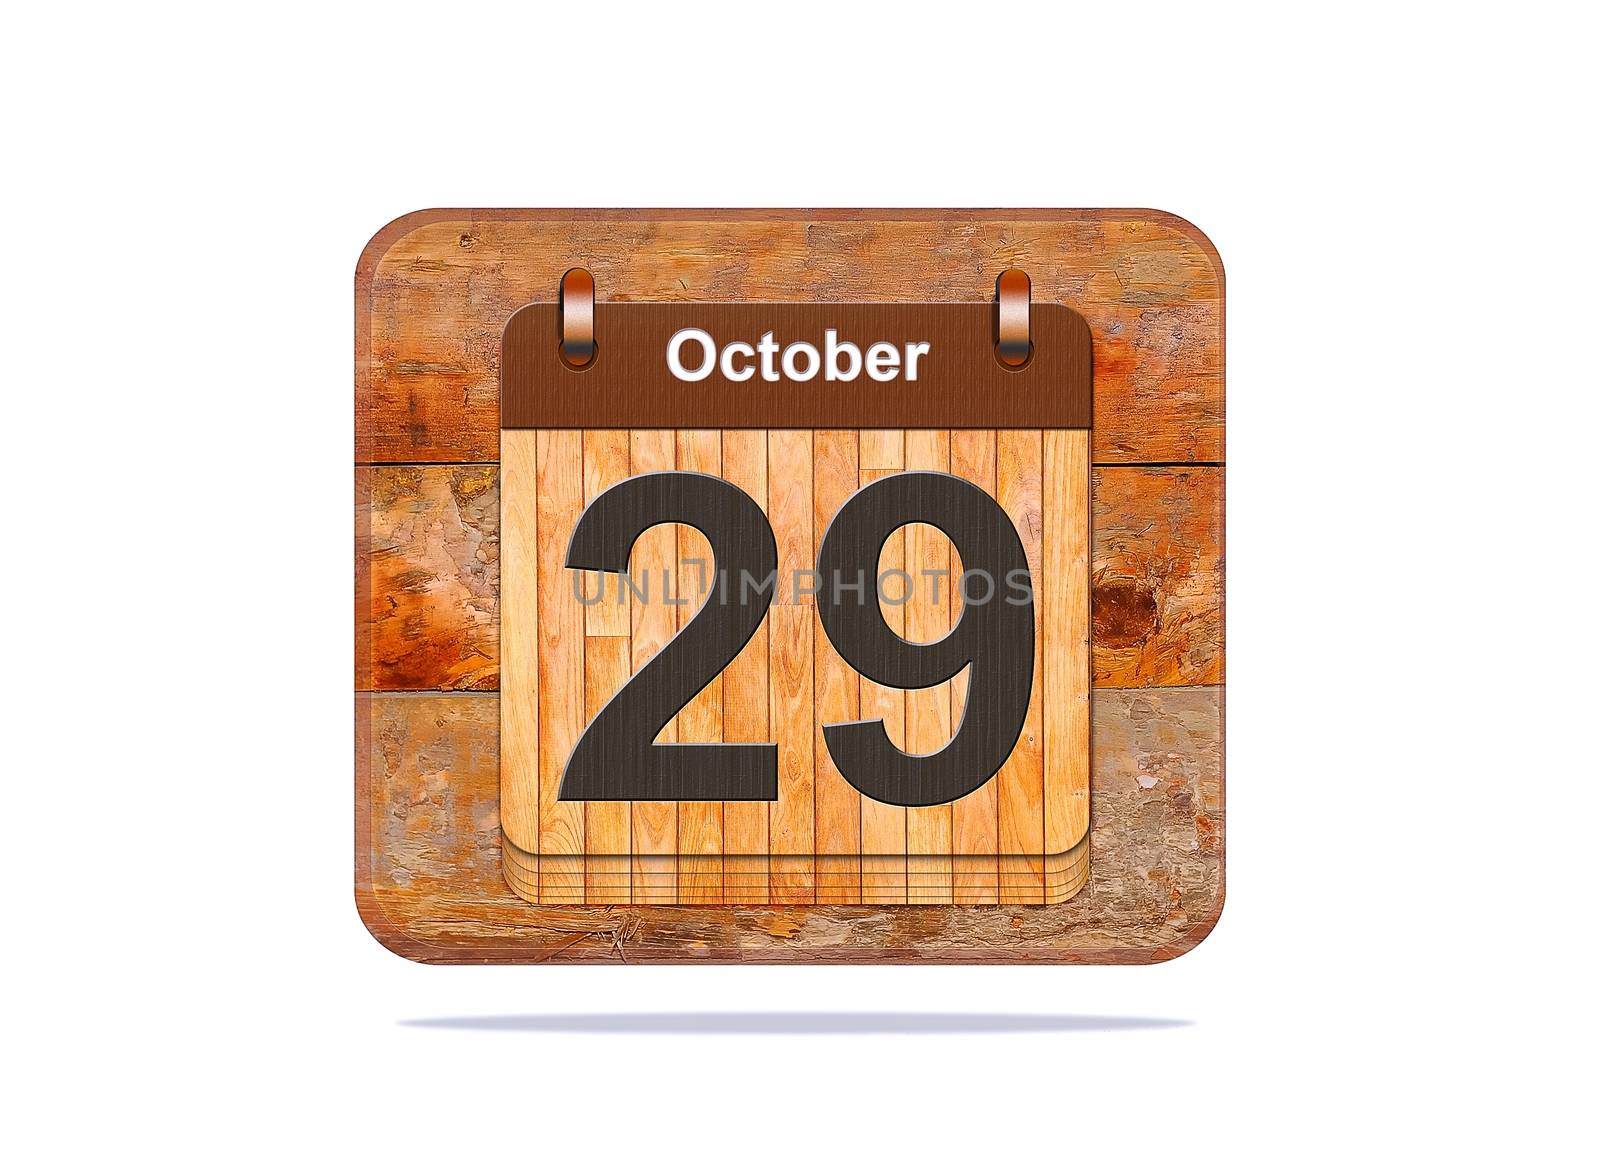 Calendar with the date of October 29.